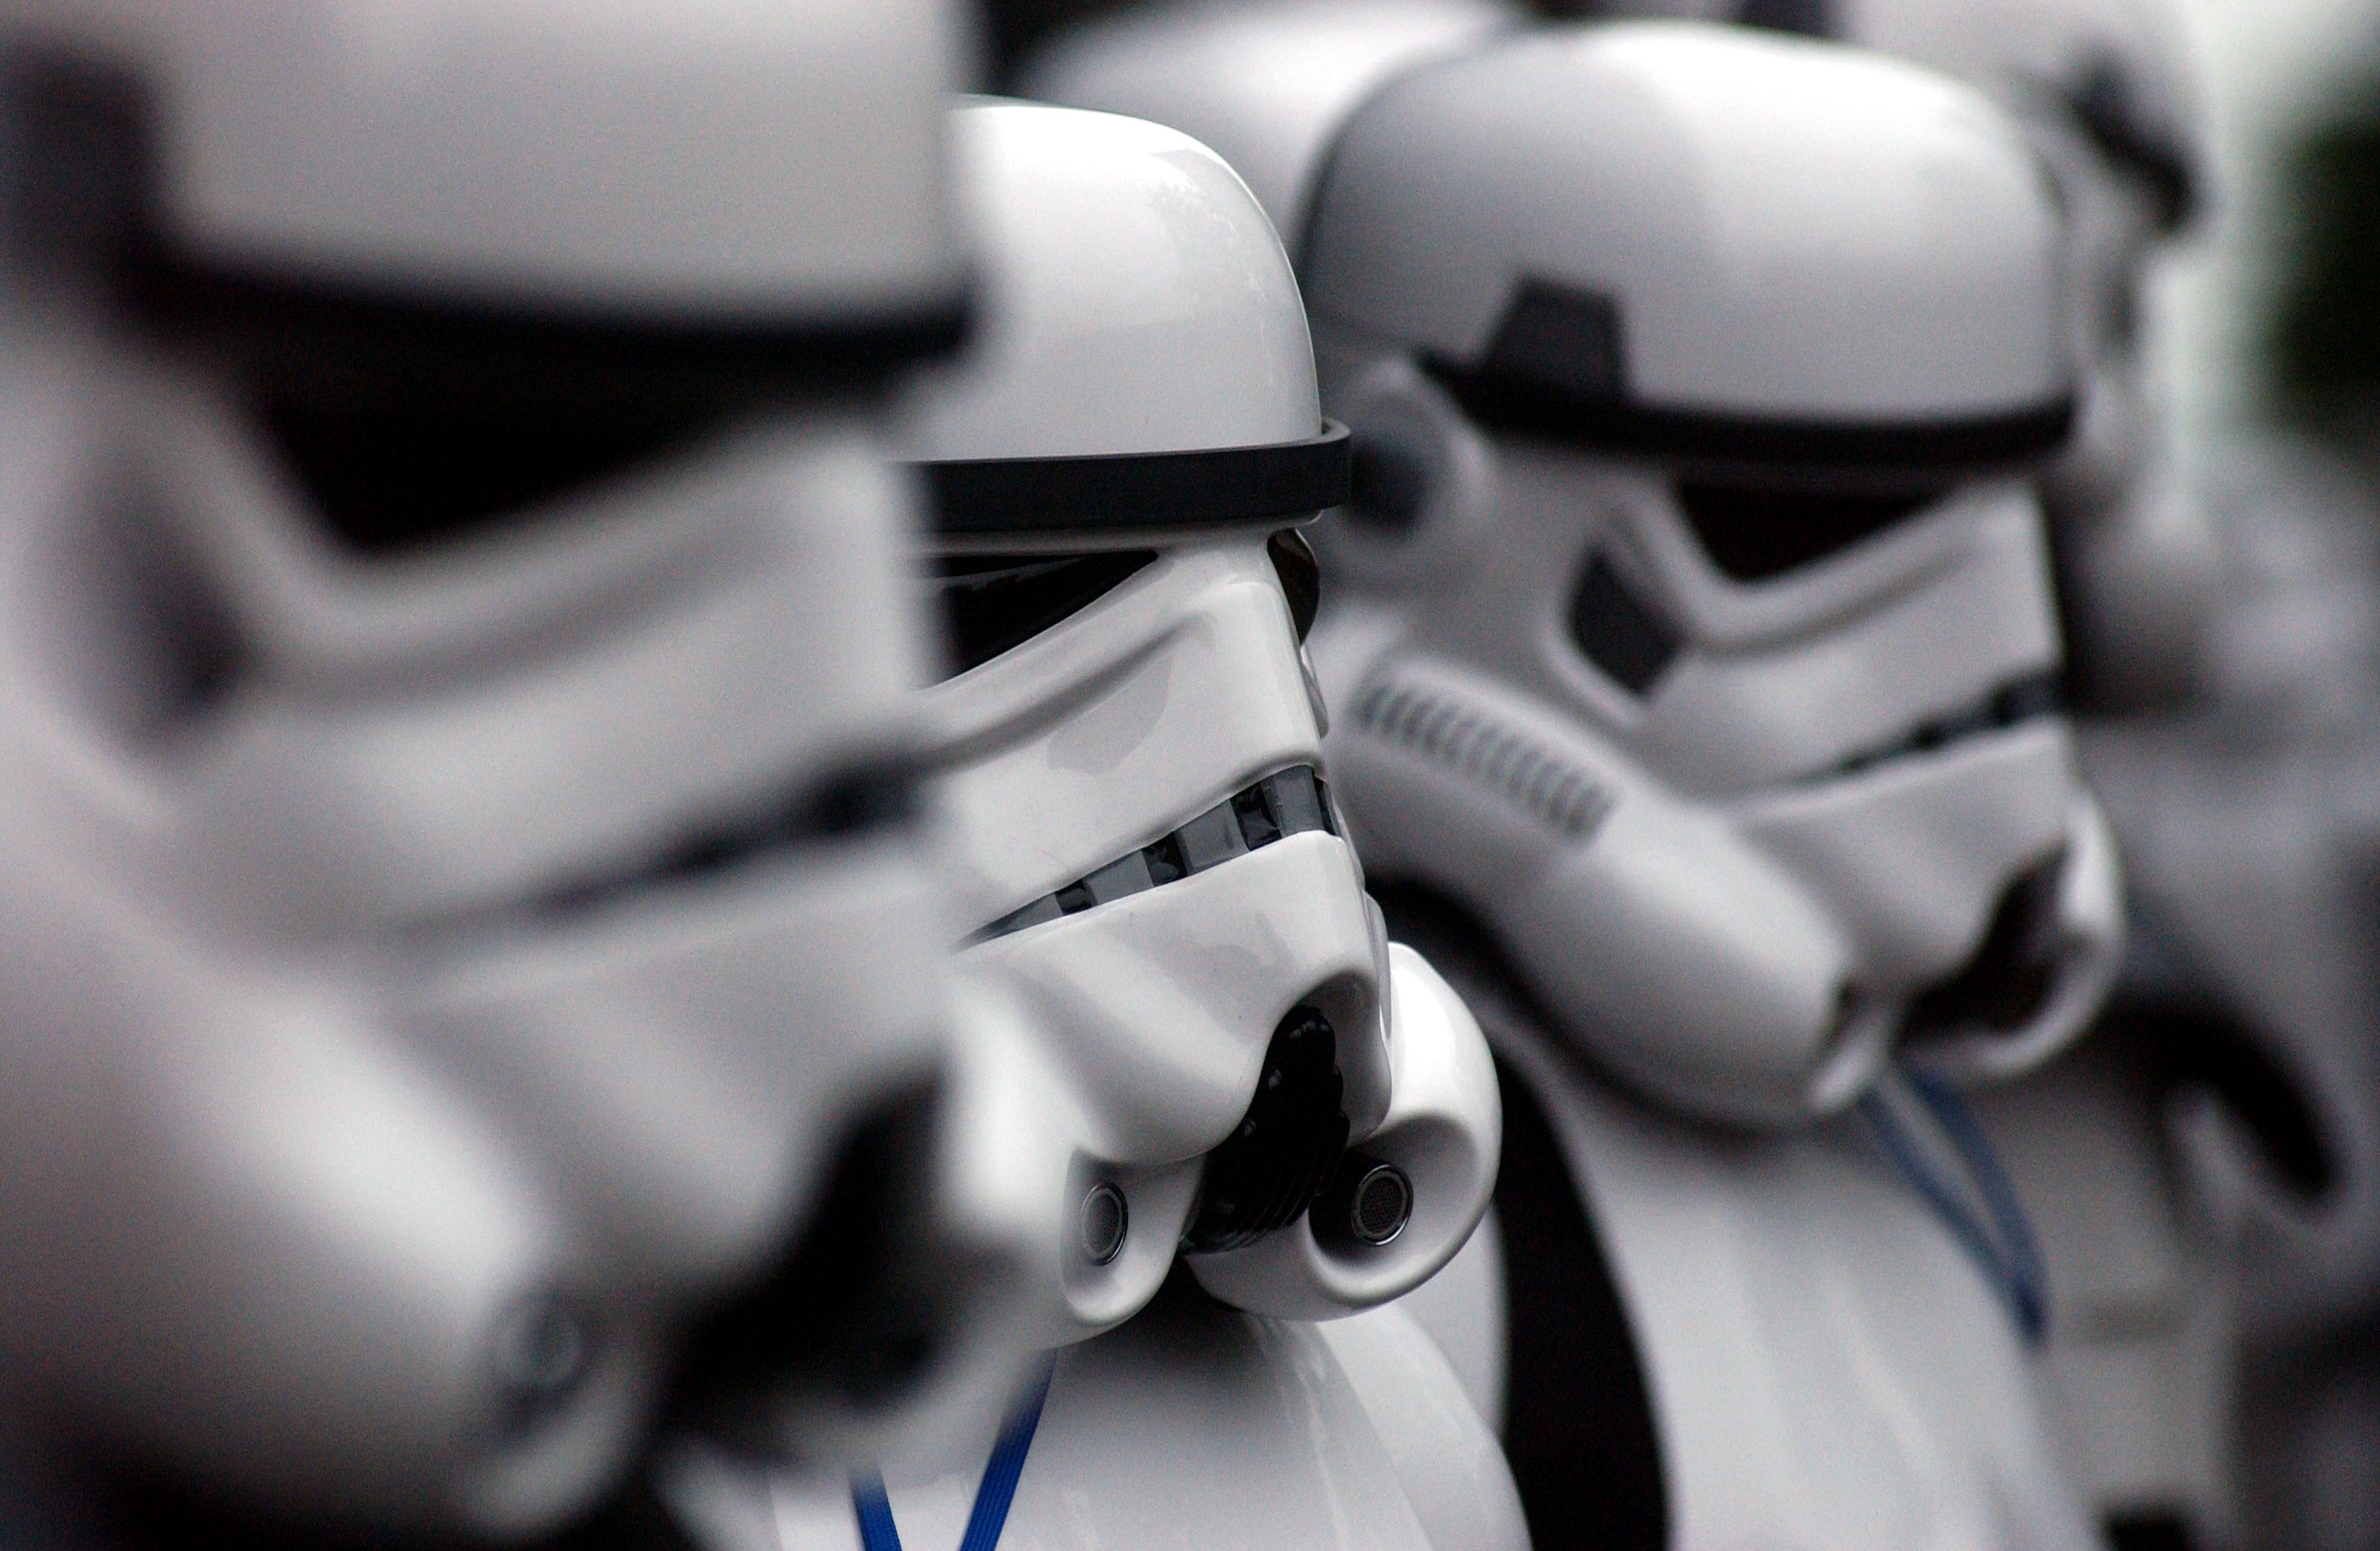 A group of Star Wars Stormtroopers